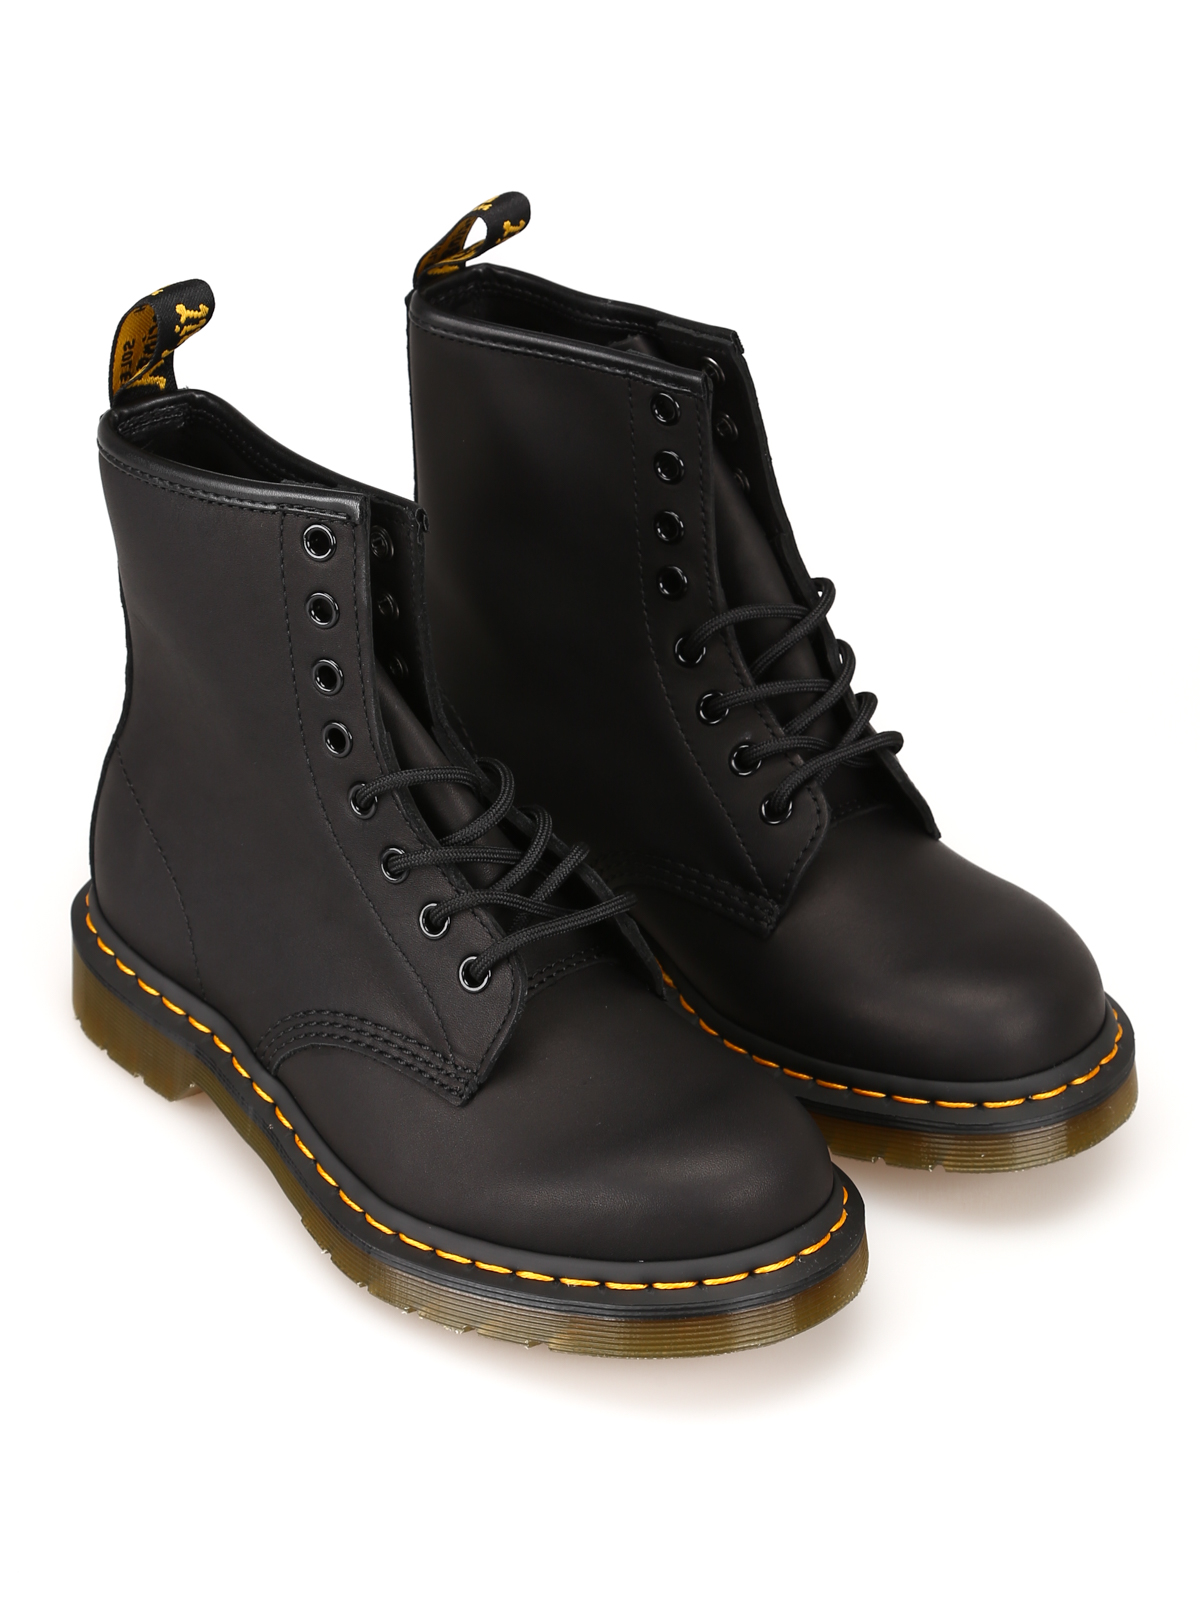 Greasy 1460 black leather combat boots 